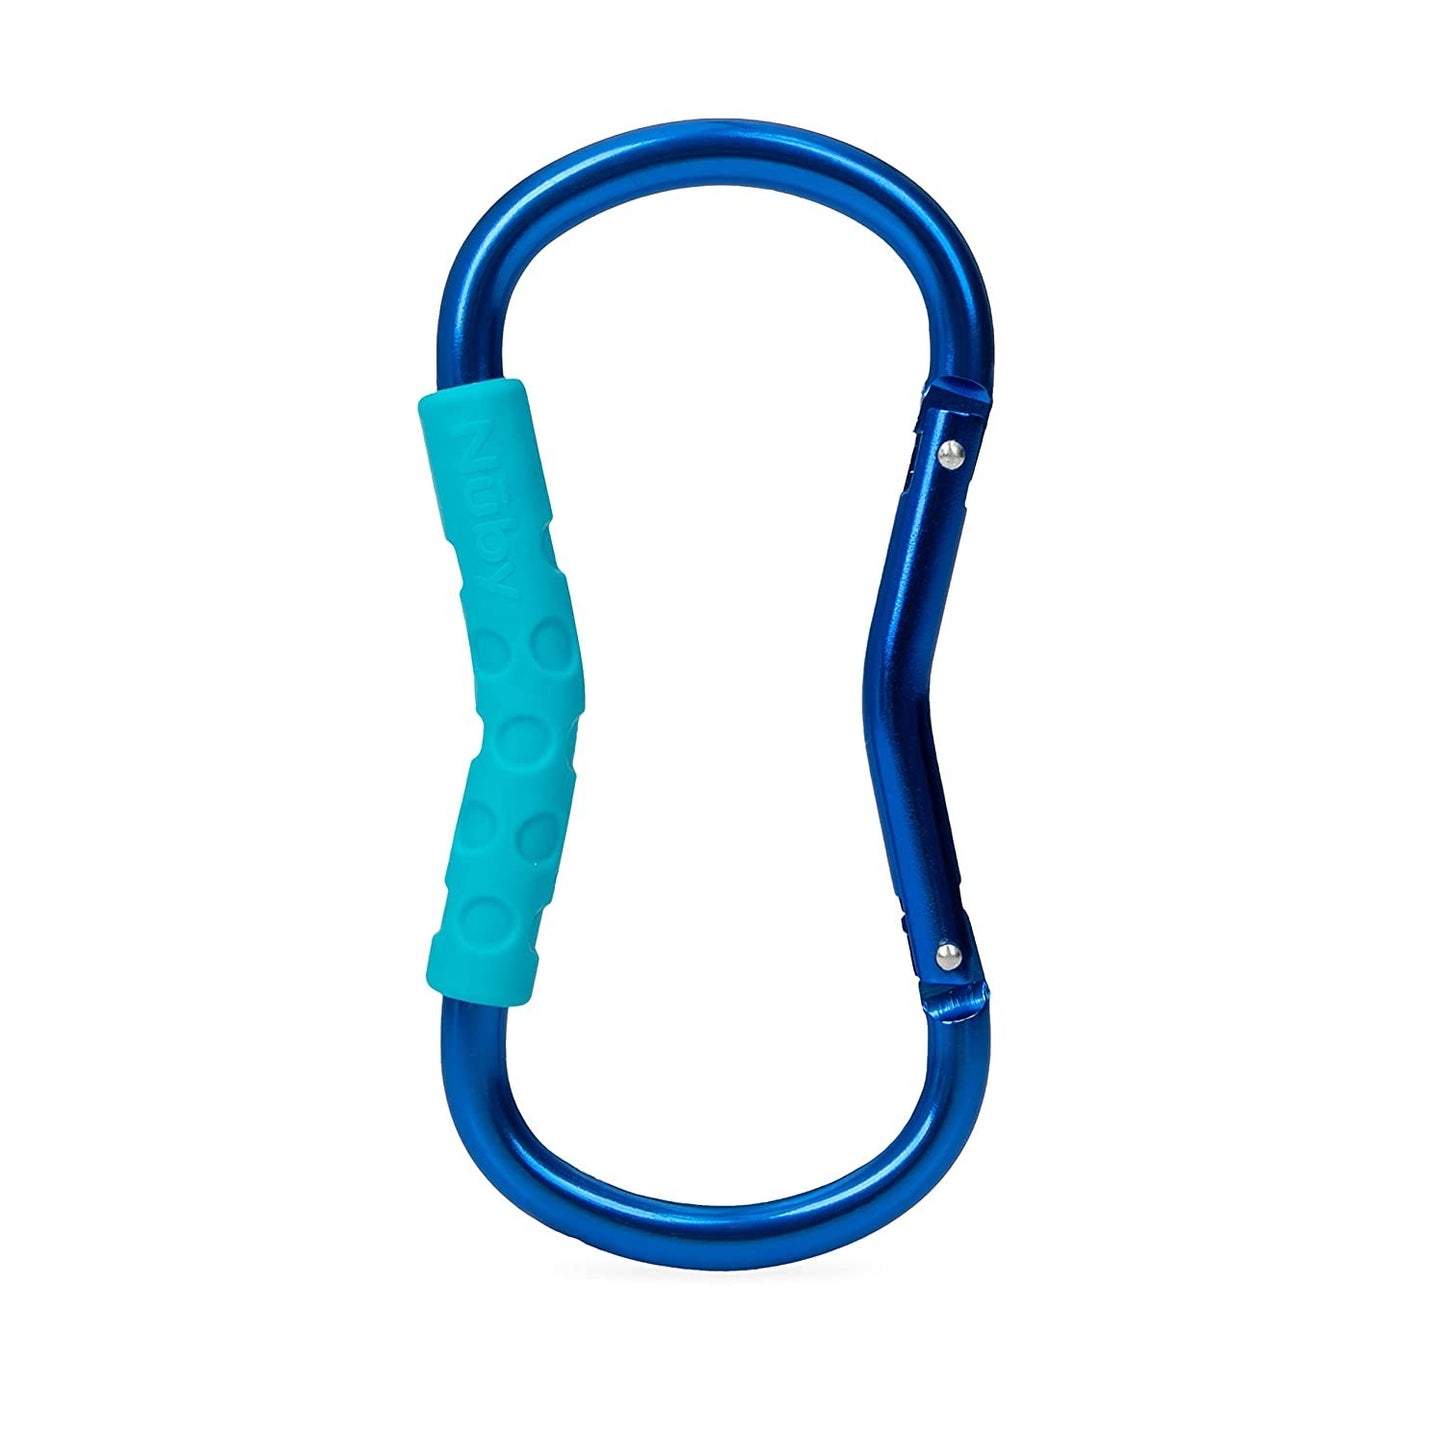 Nuby Large Handy Hook Carabiner Stoller Clip with Textured Soft Grip - Colors May Vary (Red, Blue, Aqua, Green)